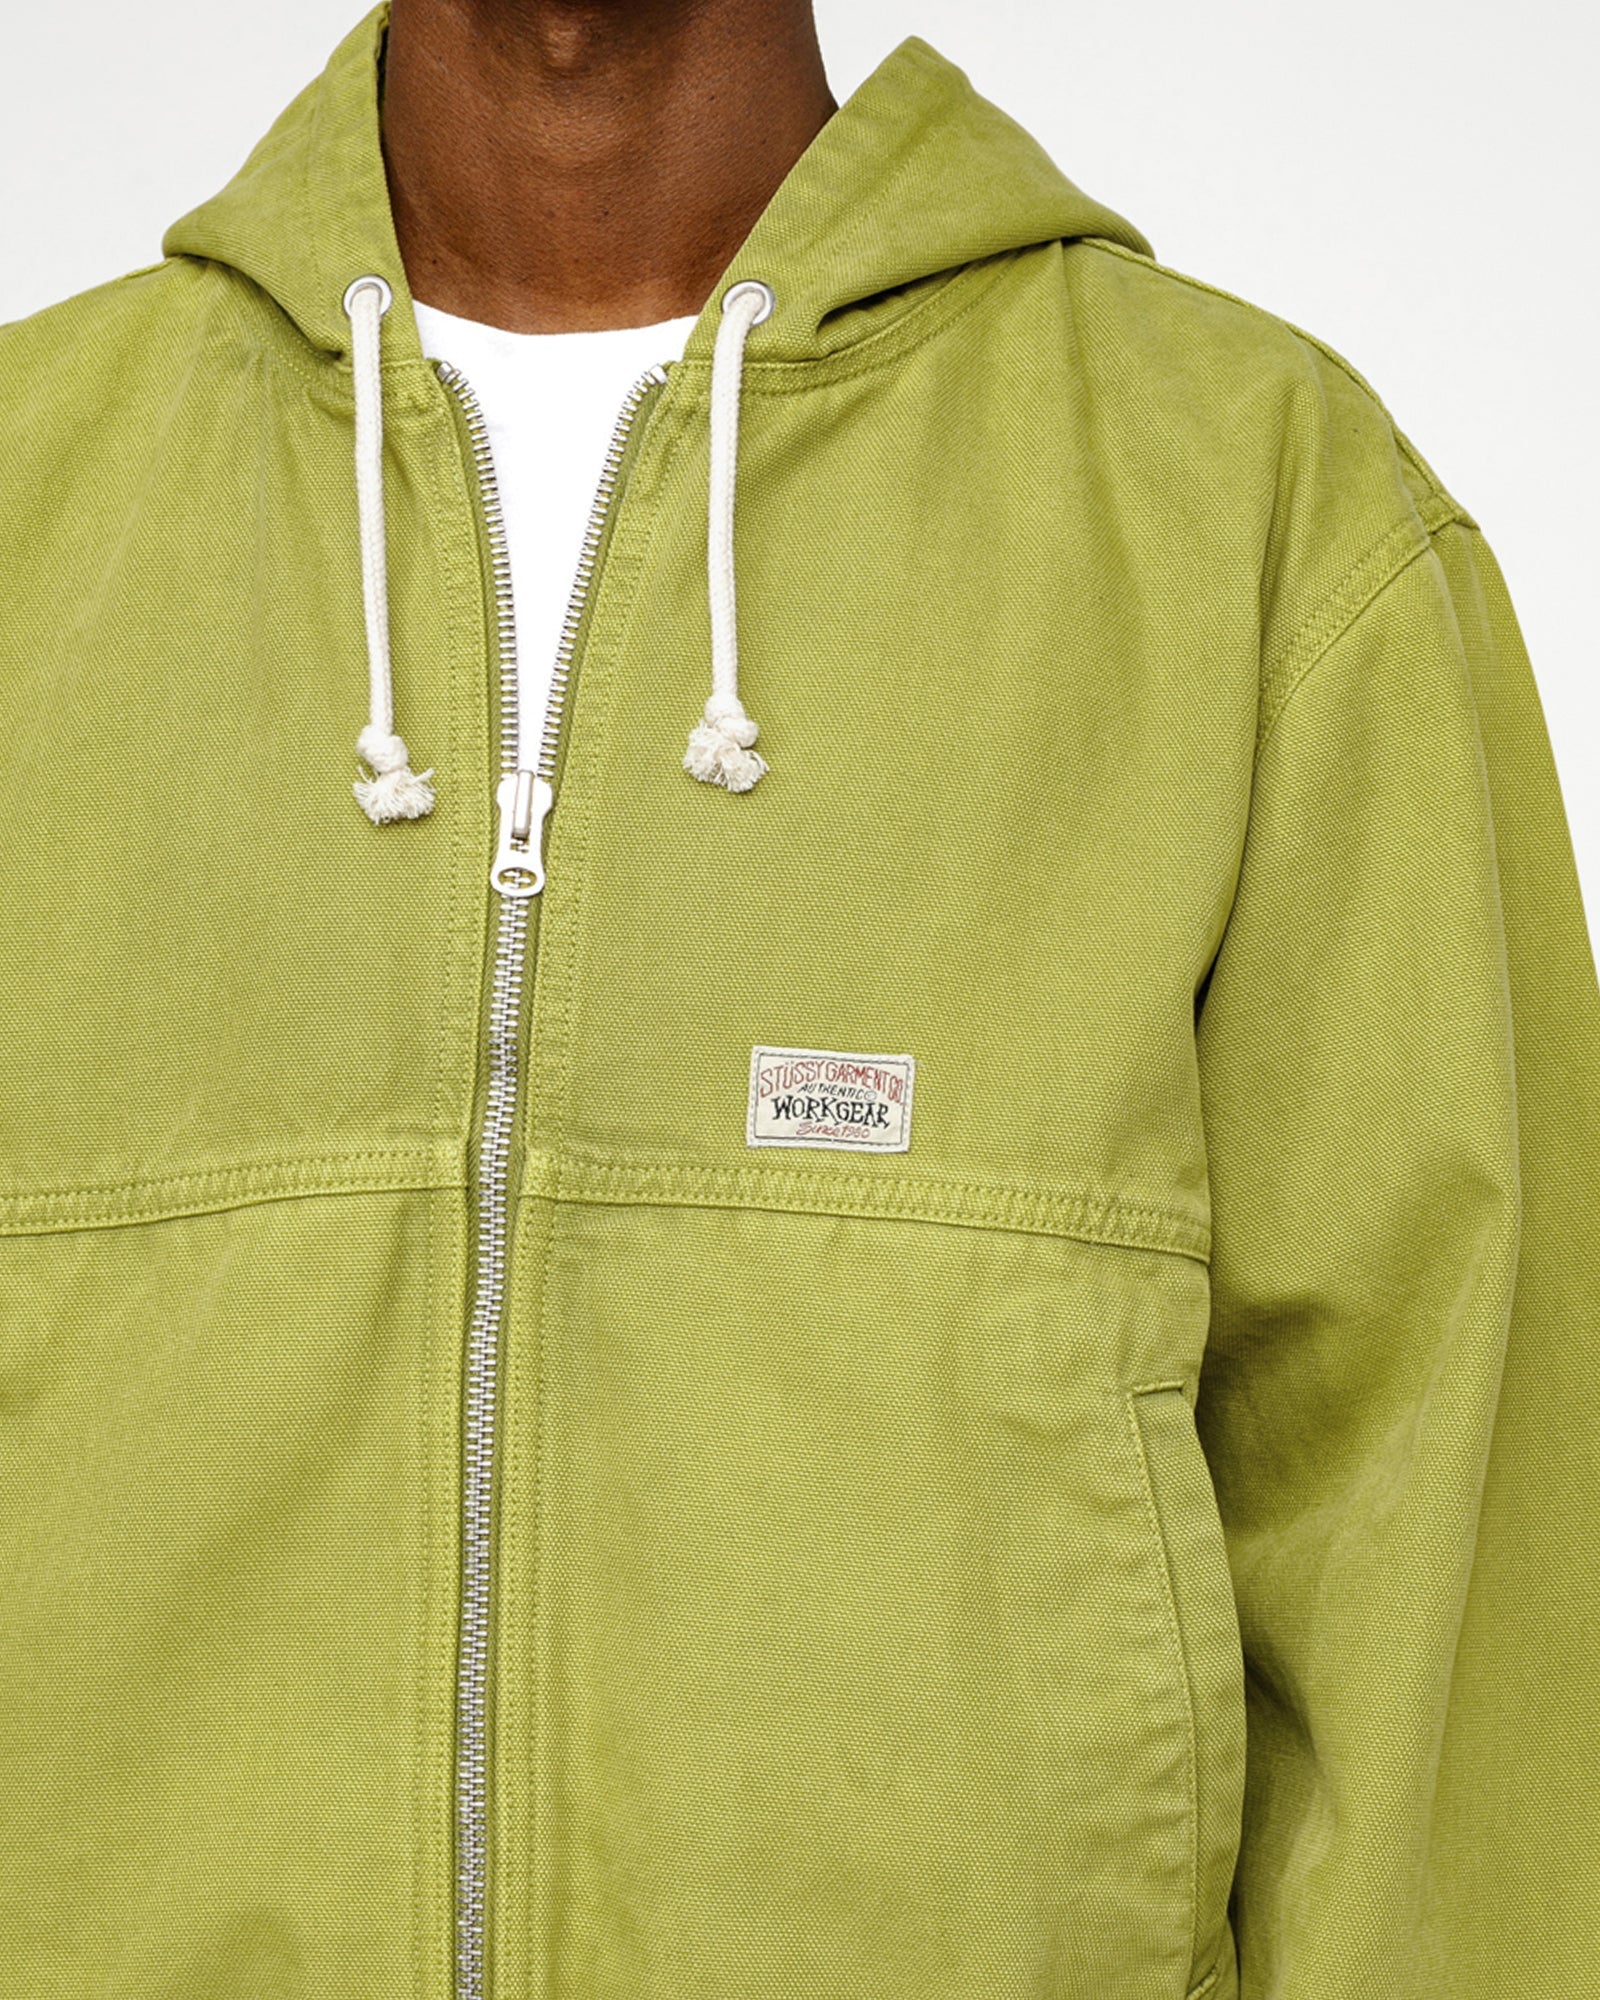 WORK JACKET UNLINED CANVAS CACTUS OUTERWEAR